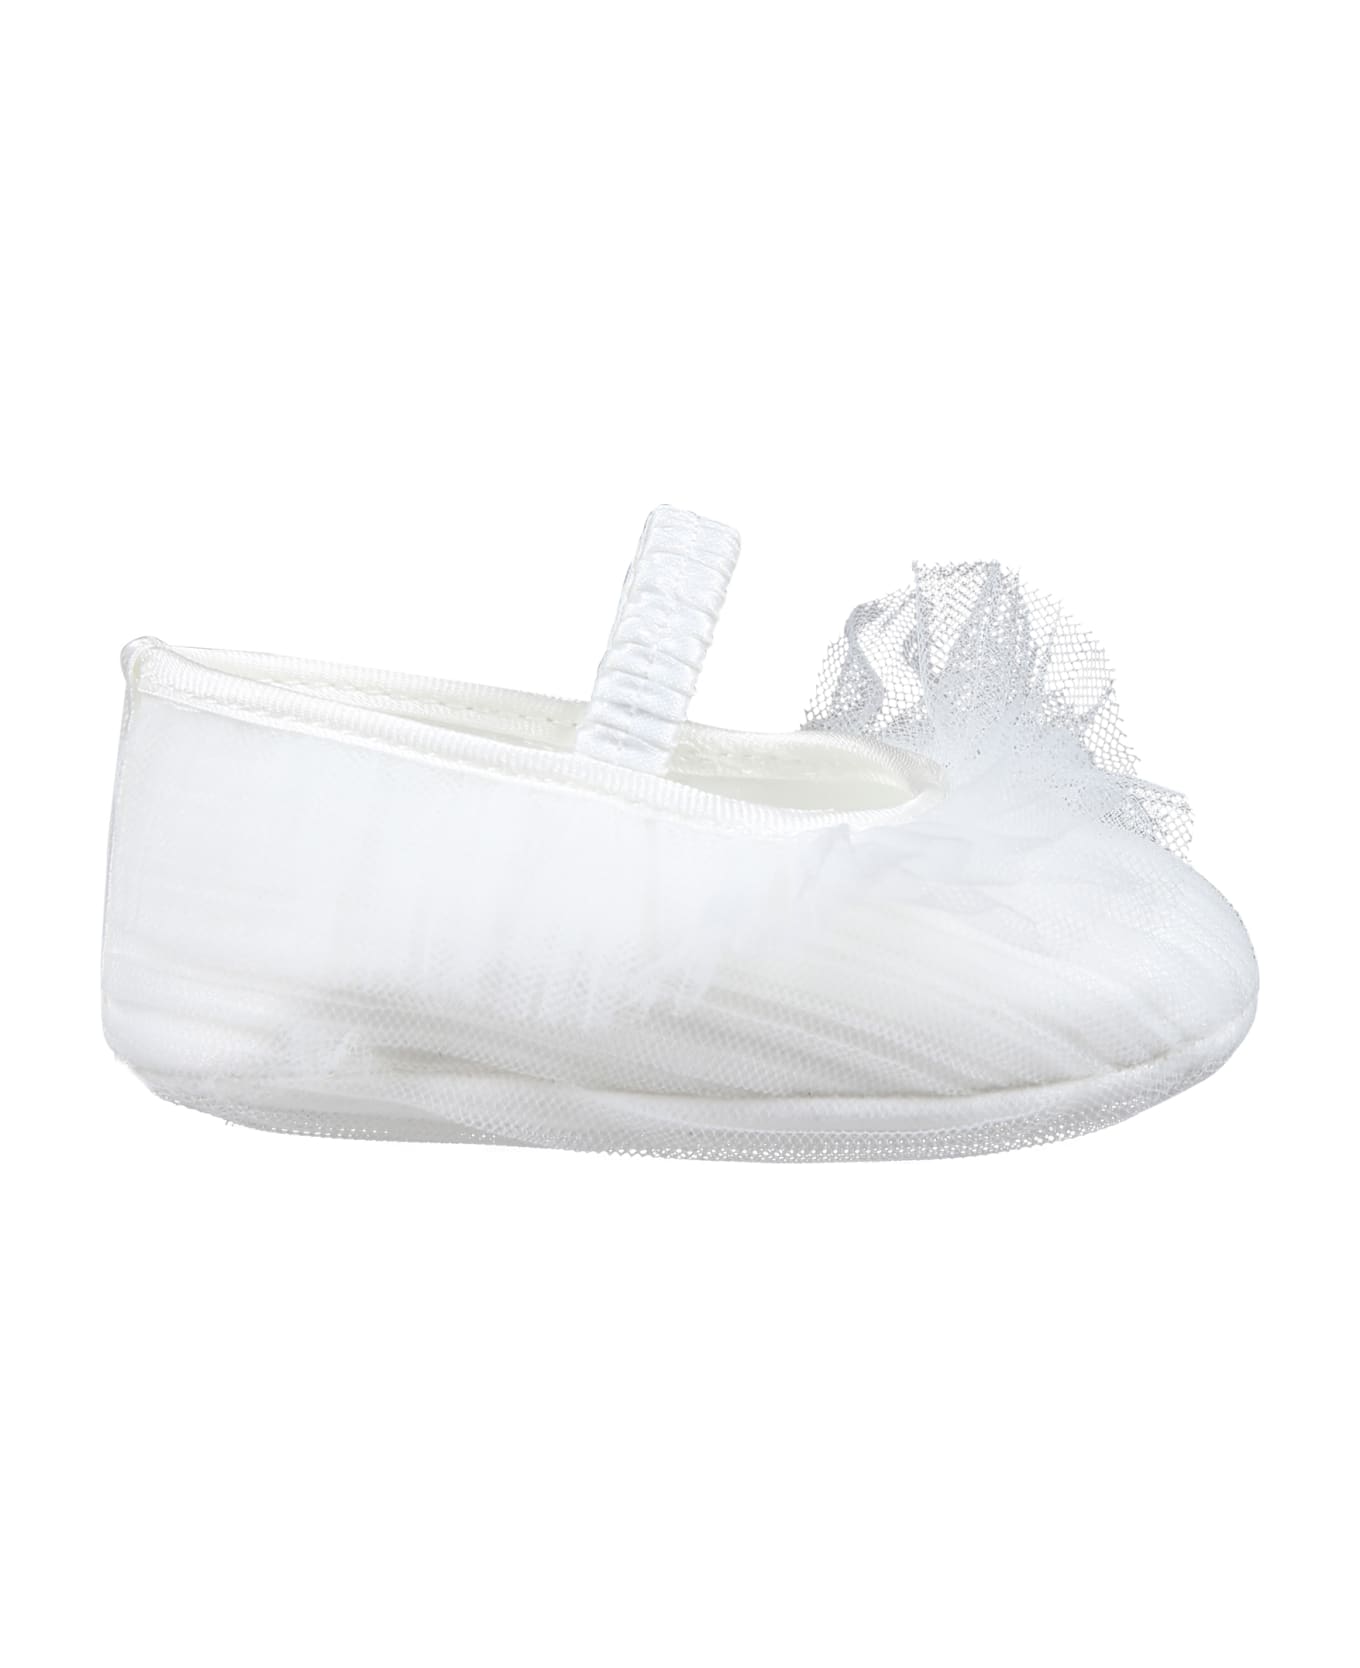 Monnalisa White Flat Shoes For Baby Girl With Tulle Bow - White